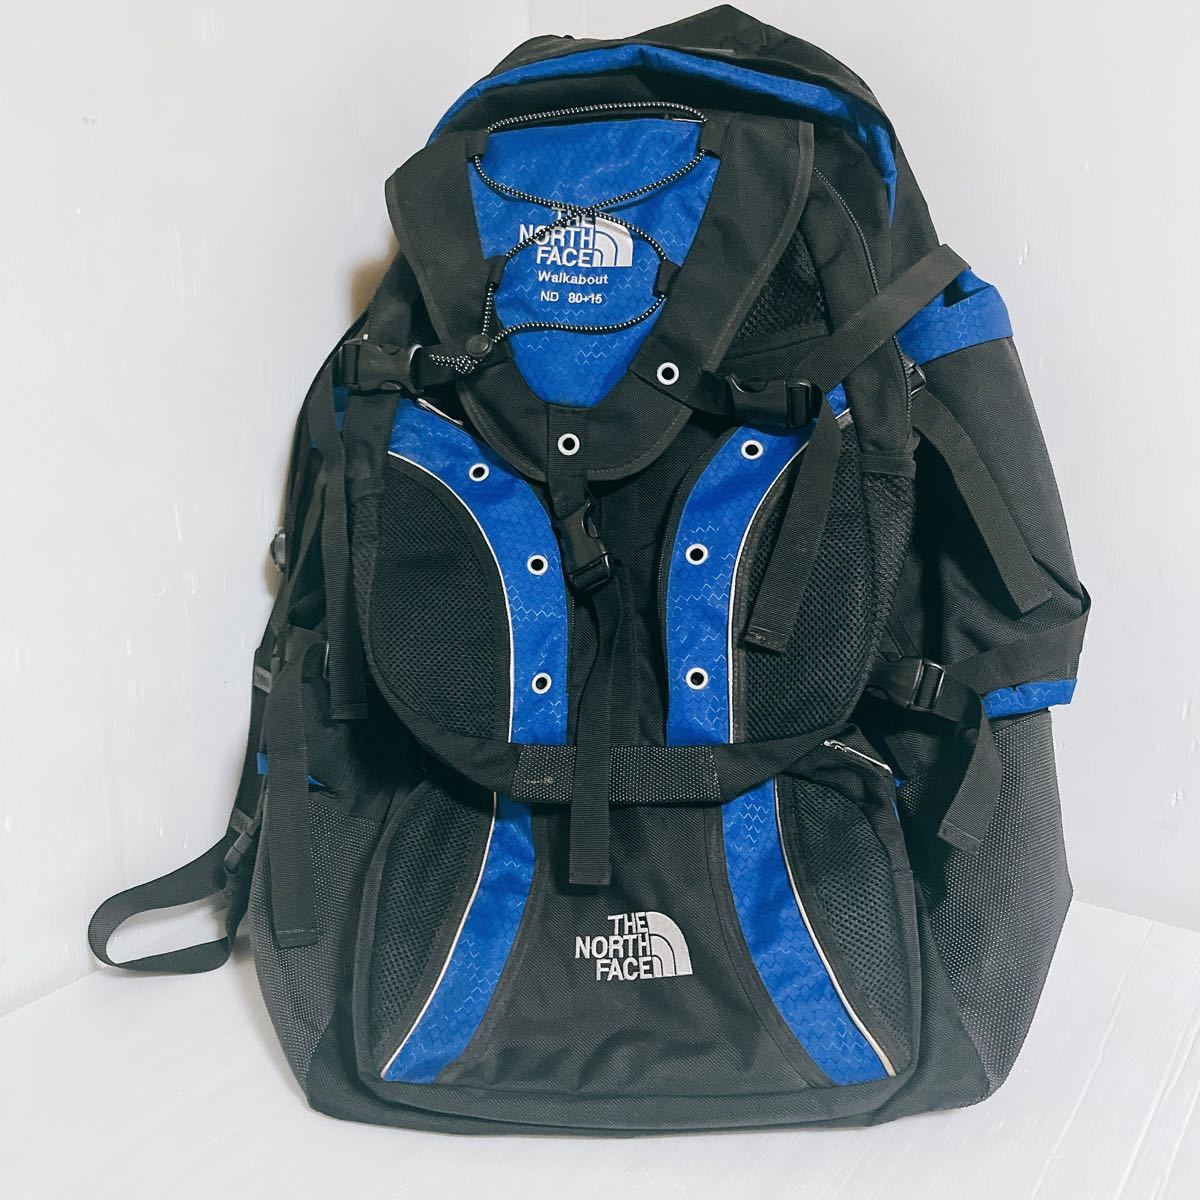 THE NORTH FACE ザ ノースフェイス　バックパック　リュックサック